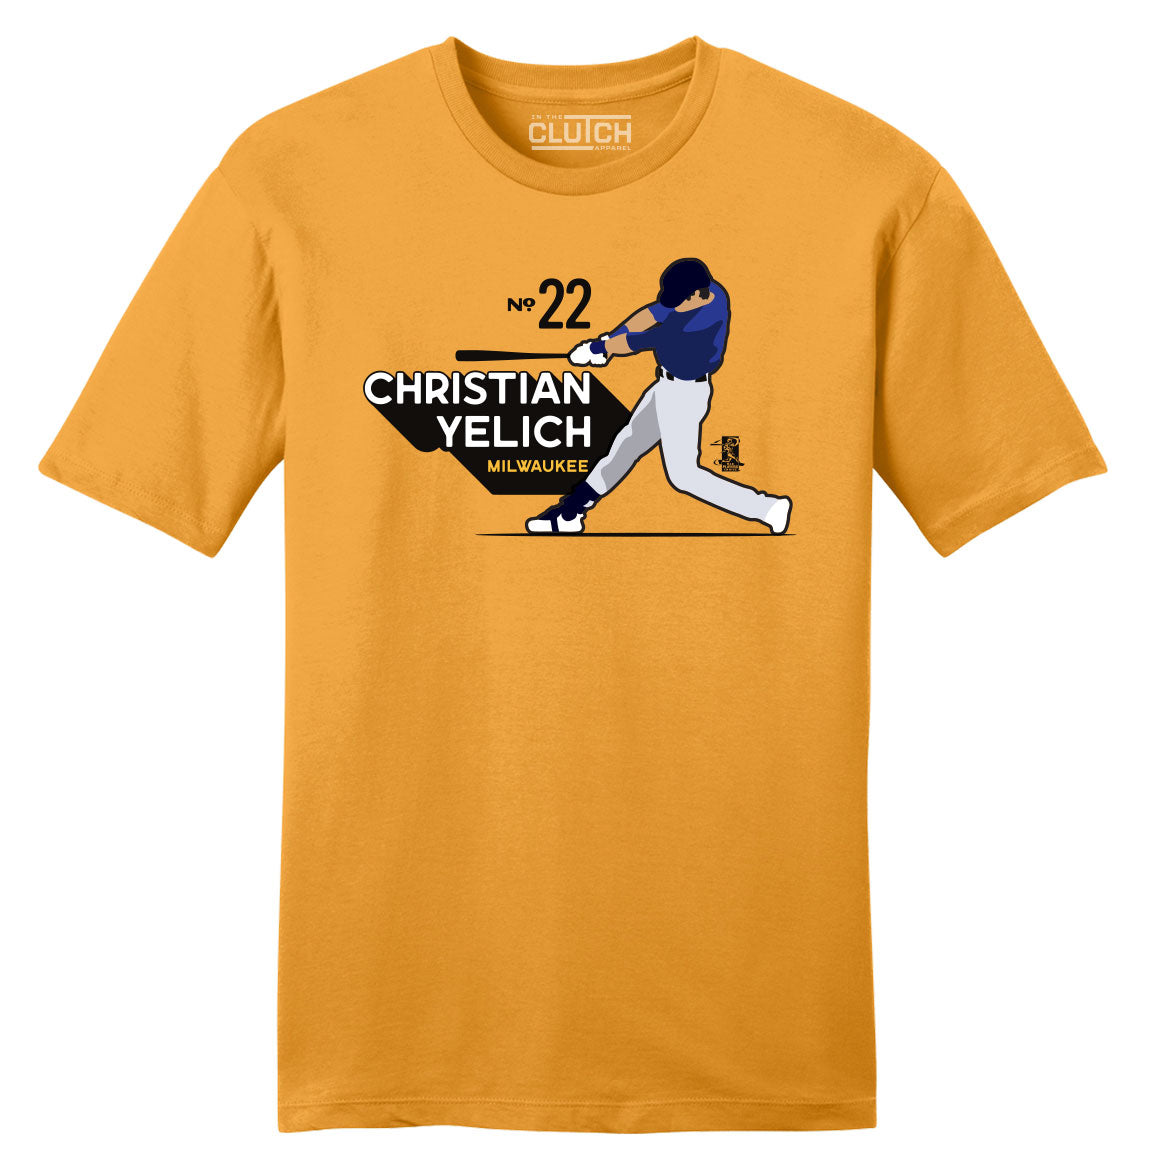 Official Christian Yelich MLBPA Gem Mint Tee, Gem Mint Collection